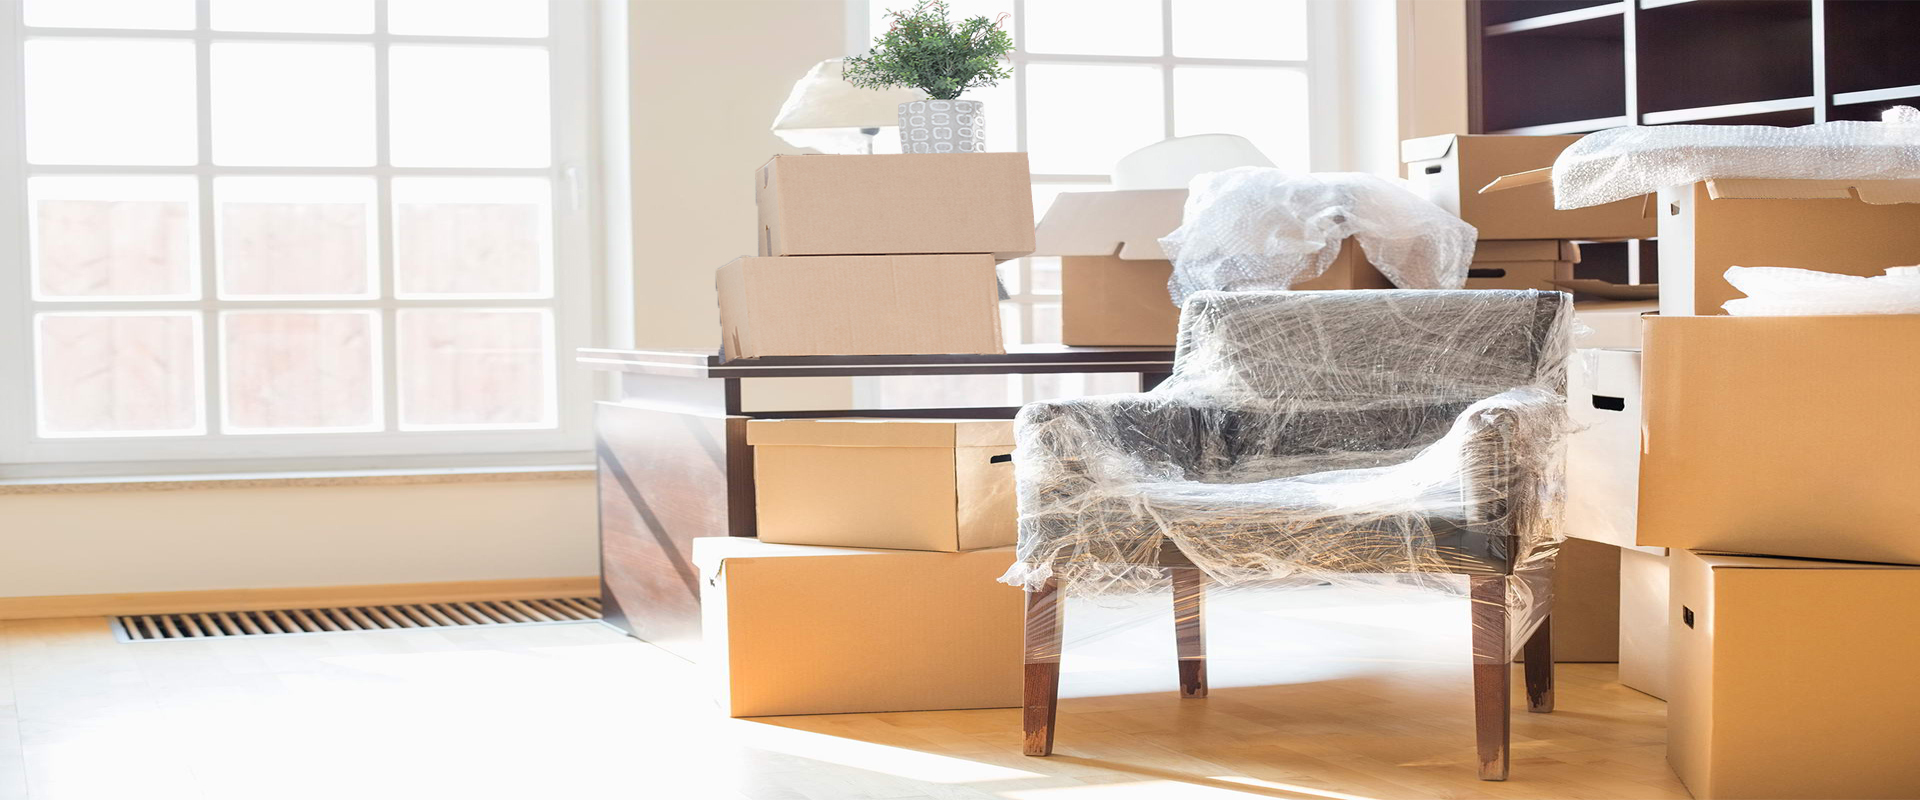 Best Packers and Movers in India - Housecarbike